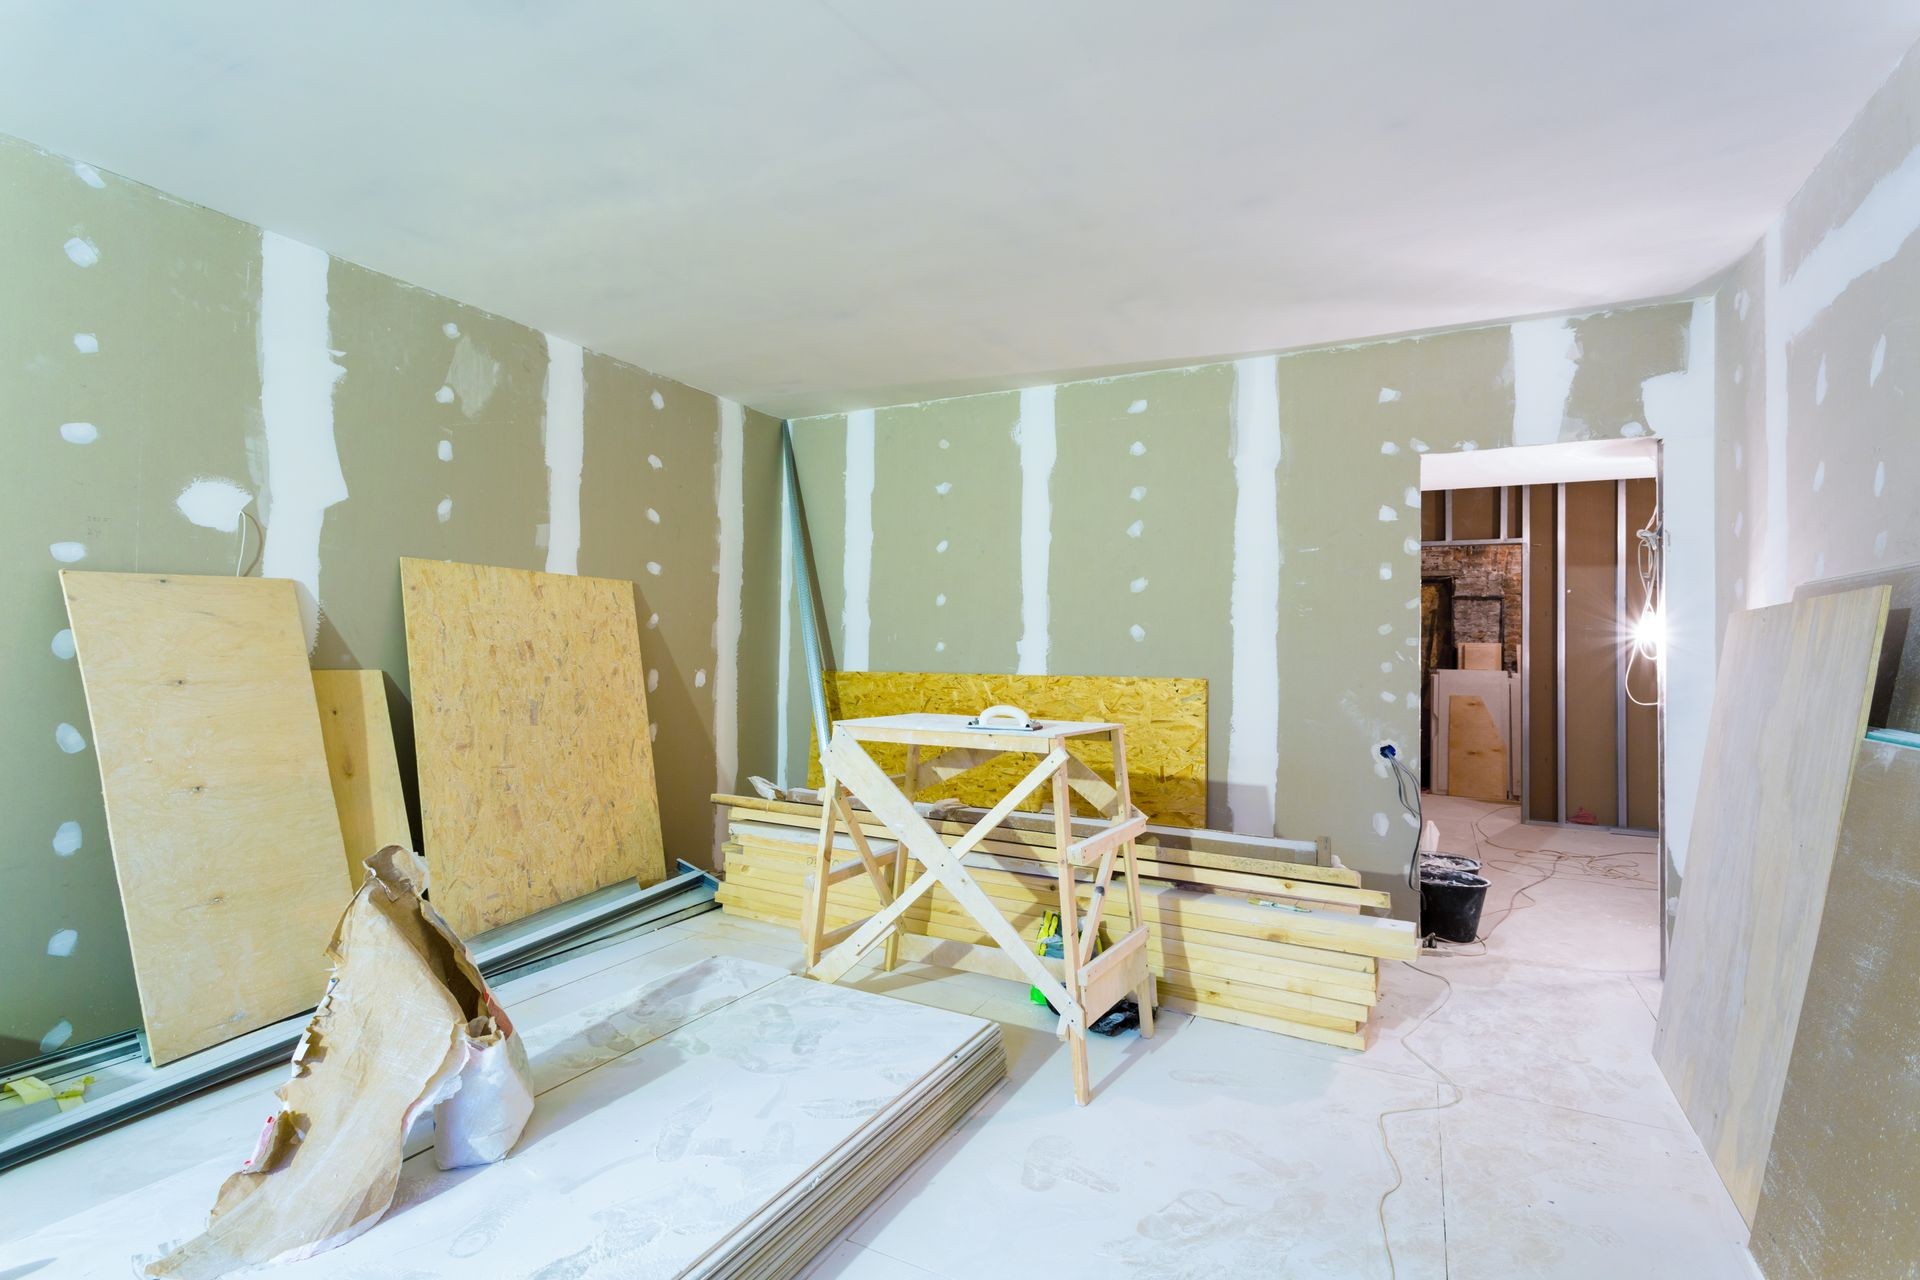 Materials for construction - putty packs, sheets of plasterboard or drywall- in apartment is under construction, remodeling, renovation, extension, restoration and reconstruction. 